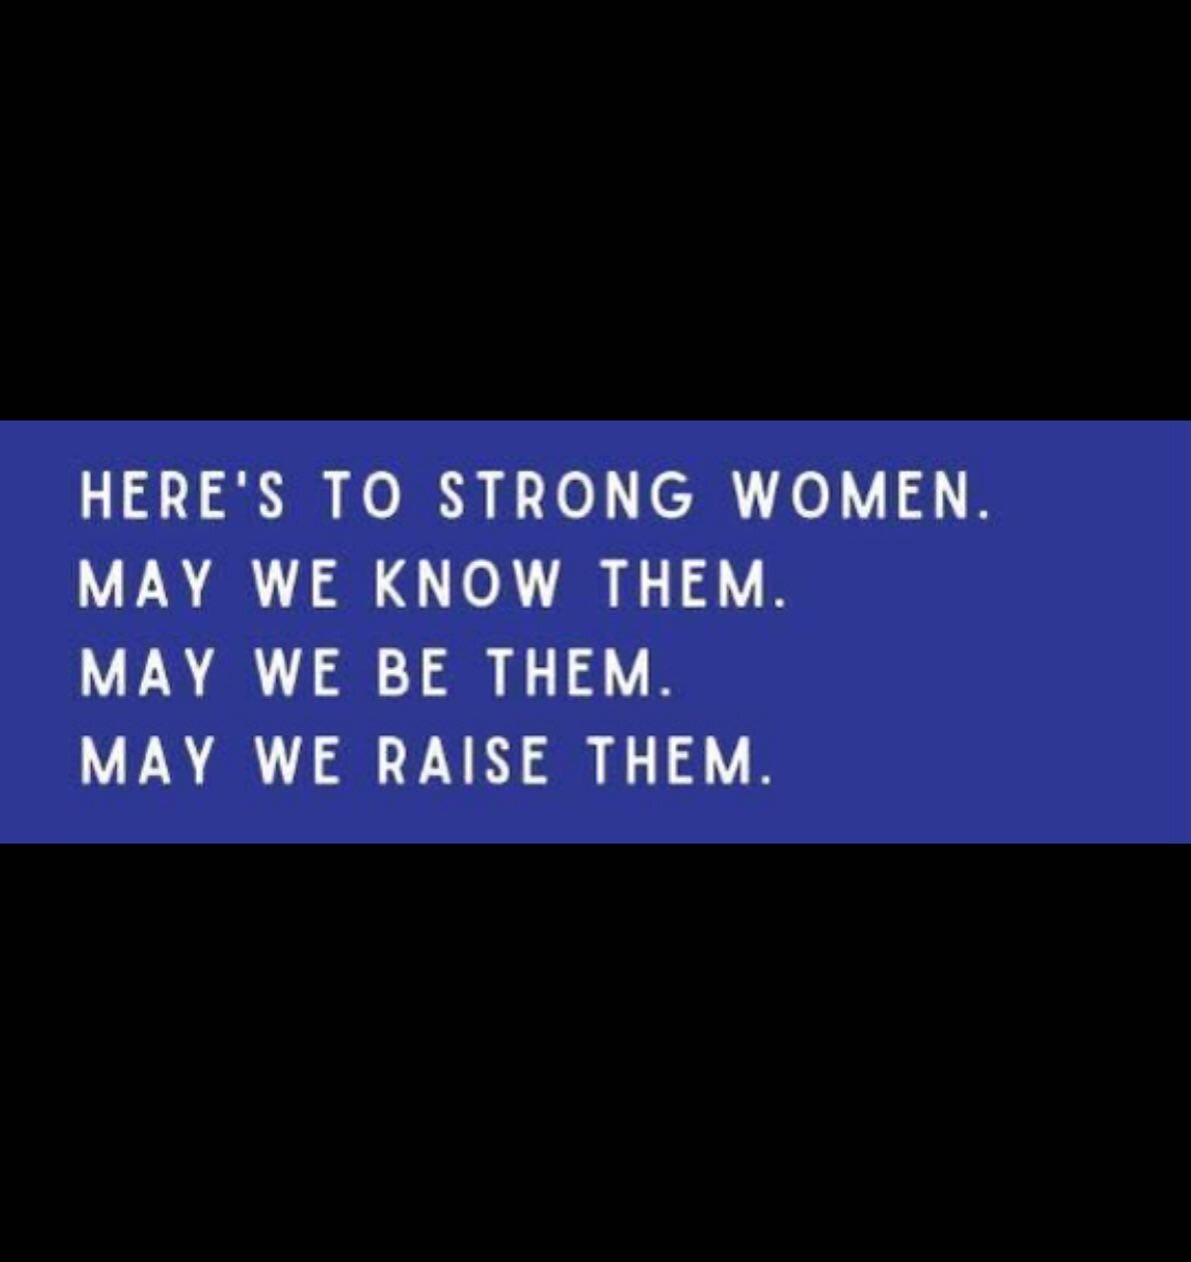 HAPPY INTERNATIONAL WOMEN&rsquo;S DAY 🫶🏿

To all of the incredible women who inspire and shape our lives every day. We are so grateful for your strong leadership, hard work and passion in our communities and homes!